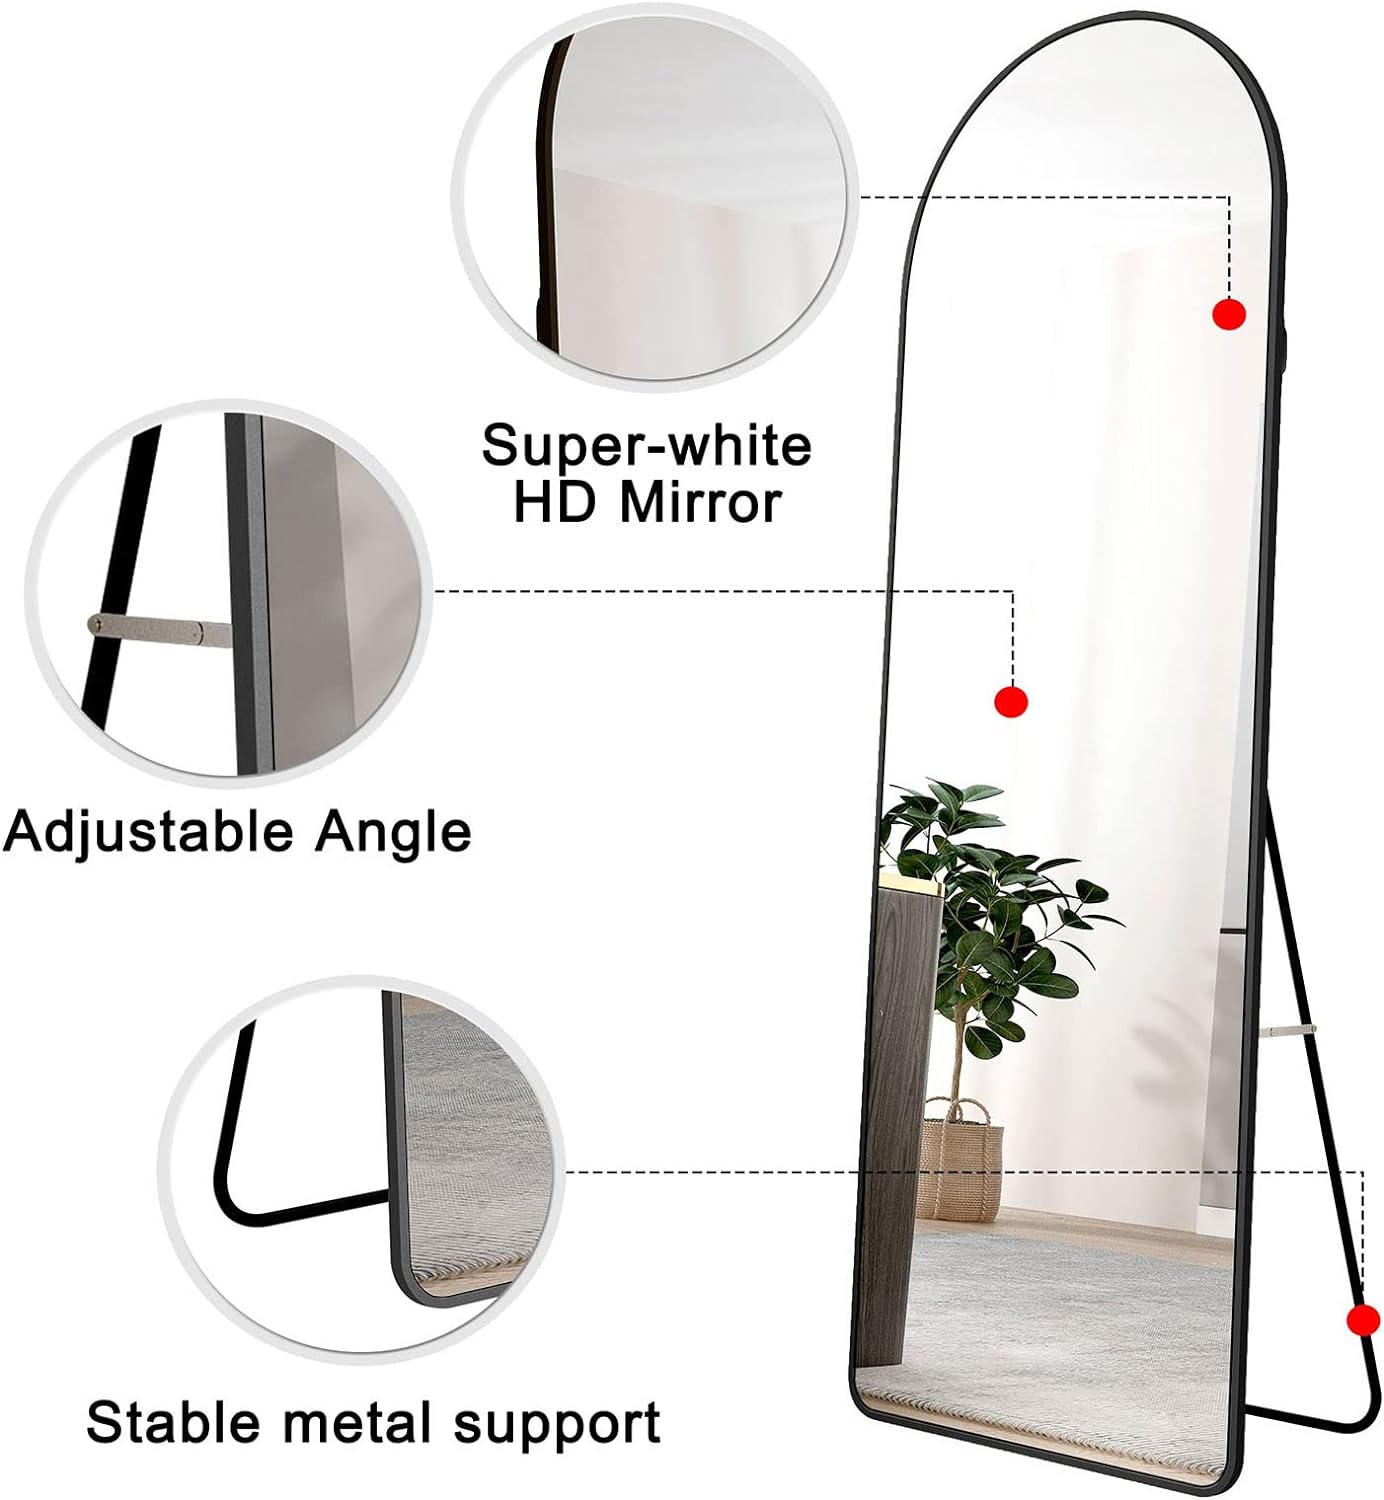 Black arched floor-length mirror 60"*16.5" Full Body Standing Mirror